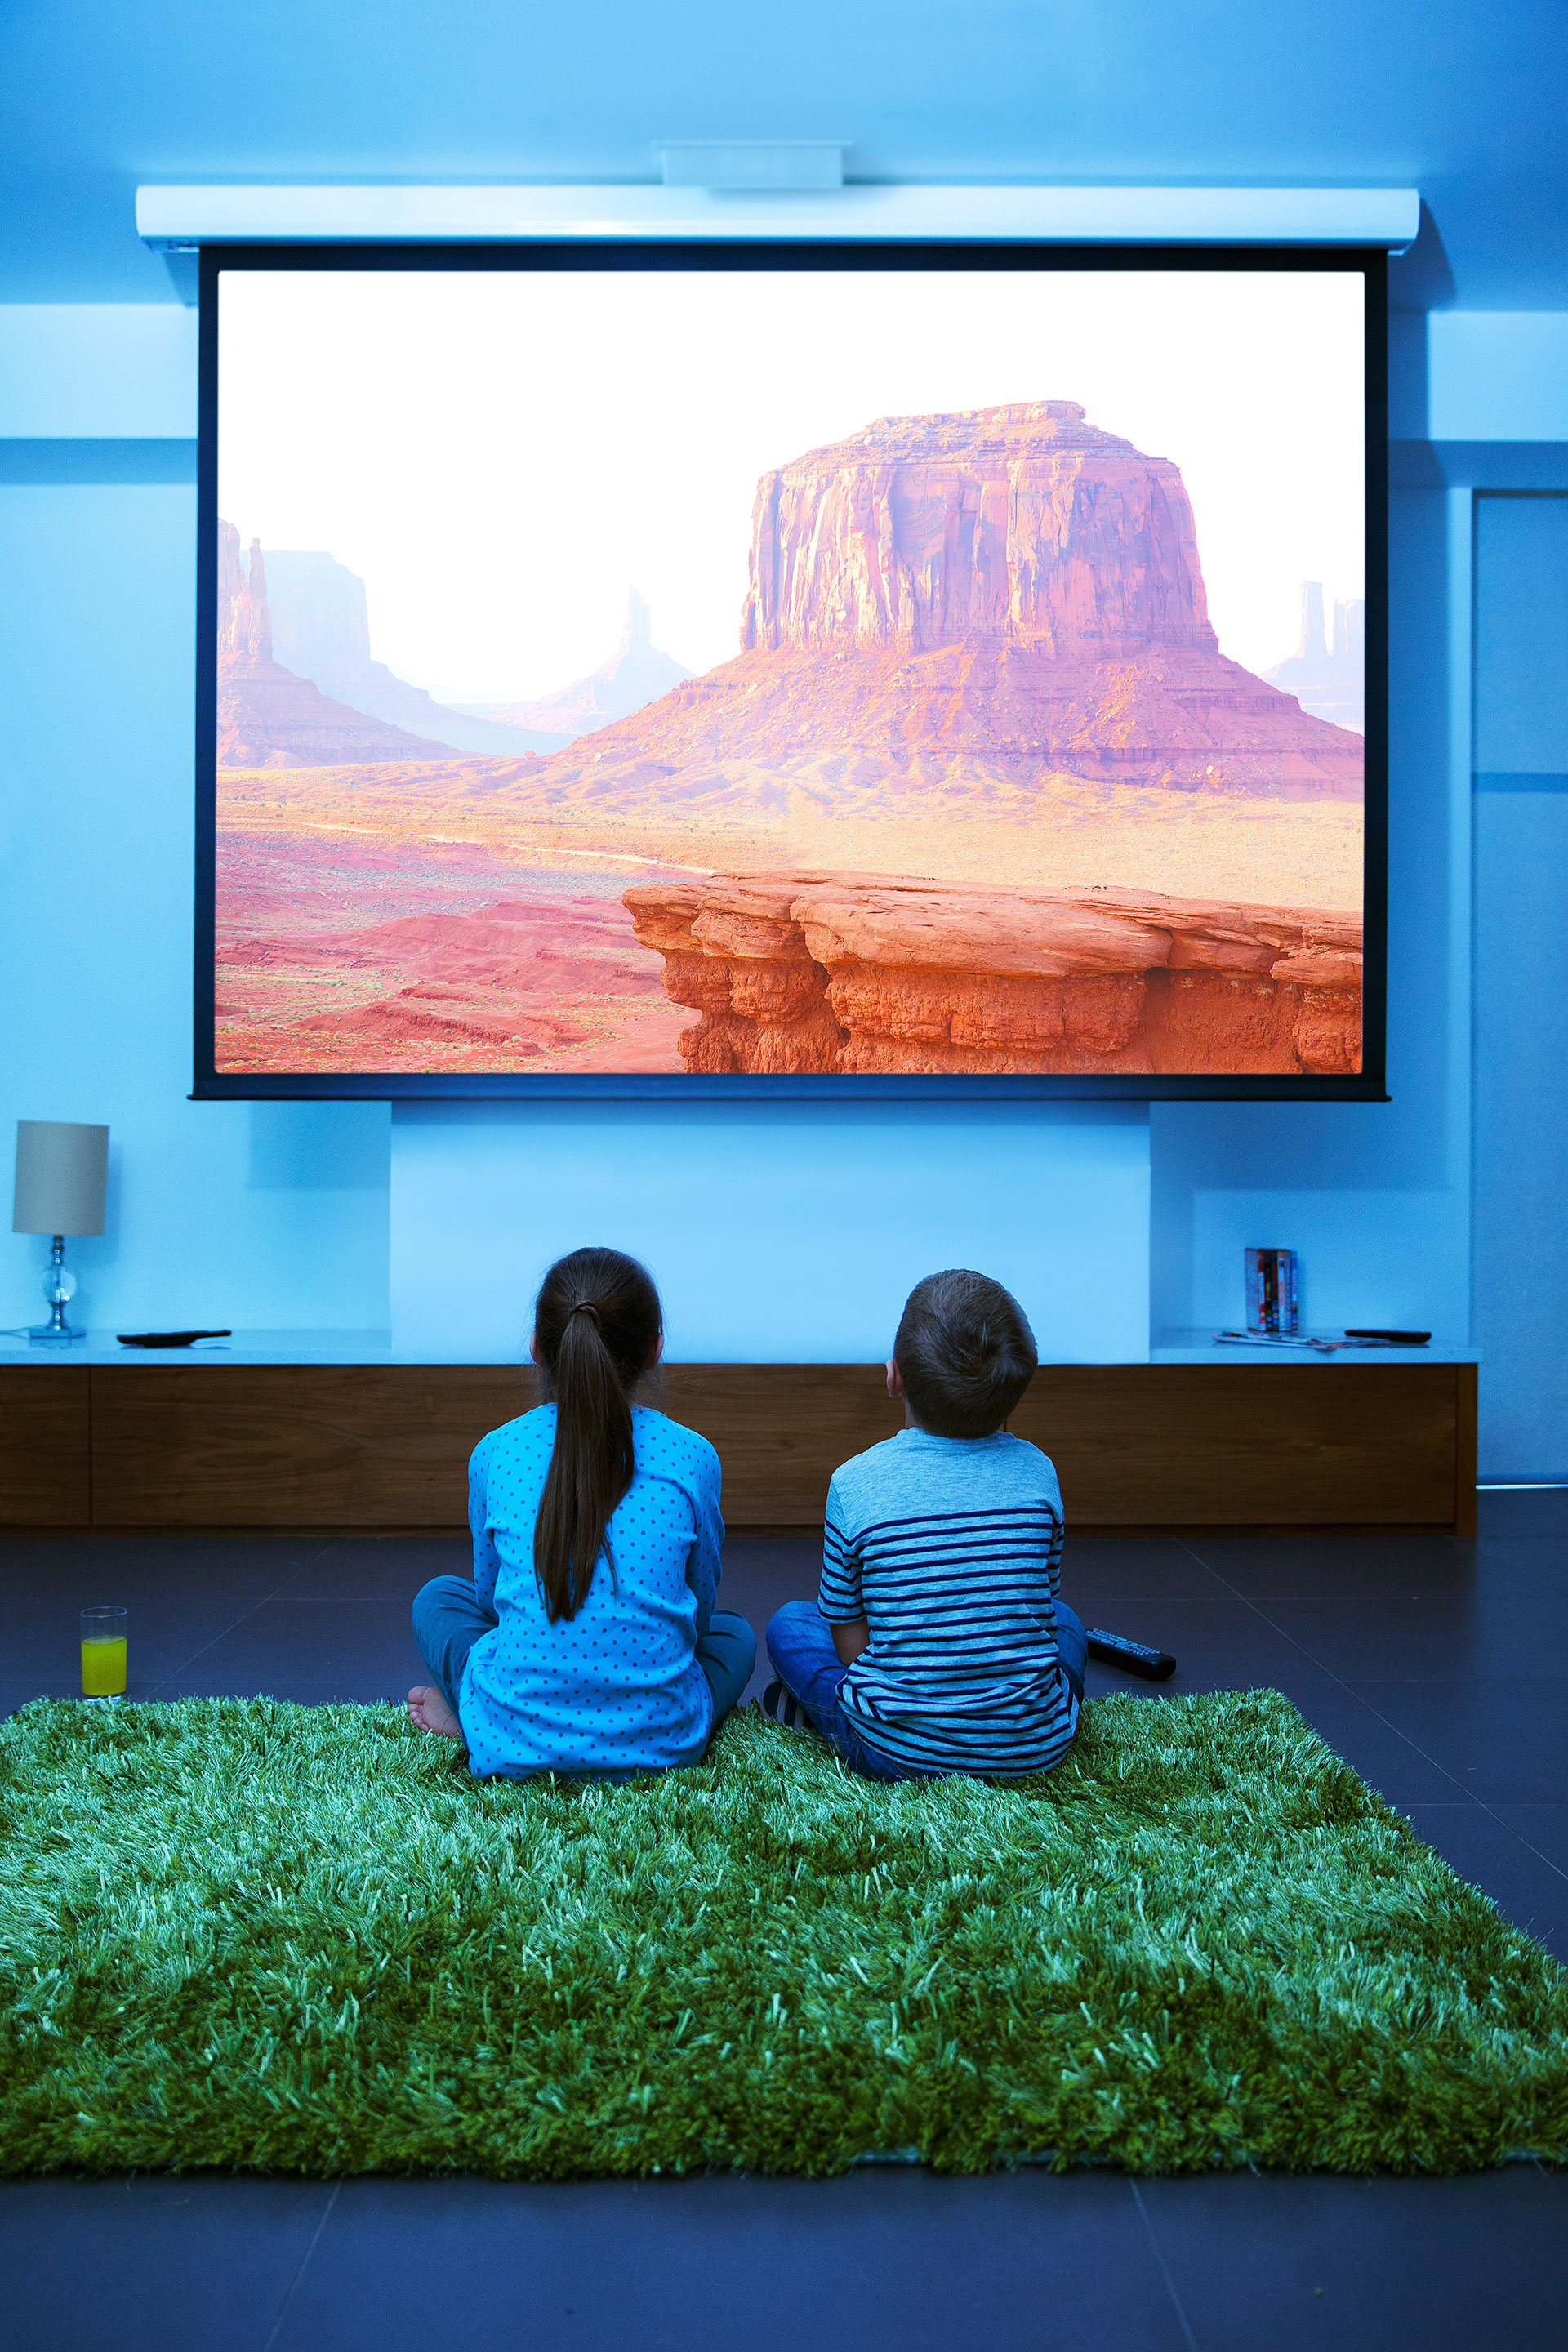 Up your entertainment set-up
                        
                        $500–$900
                        
                        Hollywood stars have been installing home cinemas for years, but falling prices and improving technology mean you can do it too. The average price of a home projector was $869 last year, according to PCMag.com data, down from more than $3,700 in 2001. Meanwhile, oversize “home theater” televisions still cost about $2,700 on average. What’s more, plenty of the mid-price options, like the $545 Optoma HD142X and the $700 Epson PowerLite 1781W, got top marks from online reviewers. Projectors might do more these days, but you’ll still need to make some compromises. Though most home projector models come with HDMI, USB, and computer connection ports, connecting to cable is difficult, so they work best for cord cutters. Additionally, built-in sound is generally not as good on projectors as it is on TVs. If that’s a deal breaker, consider connecting a speaker system.